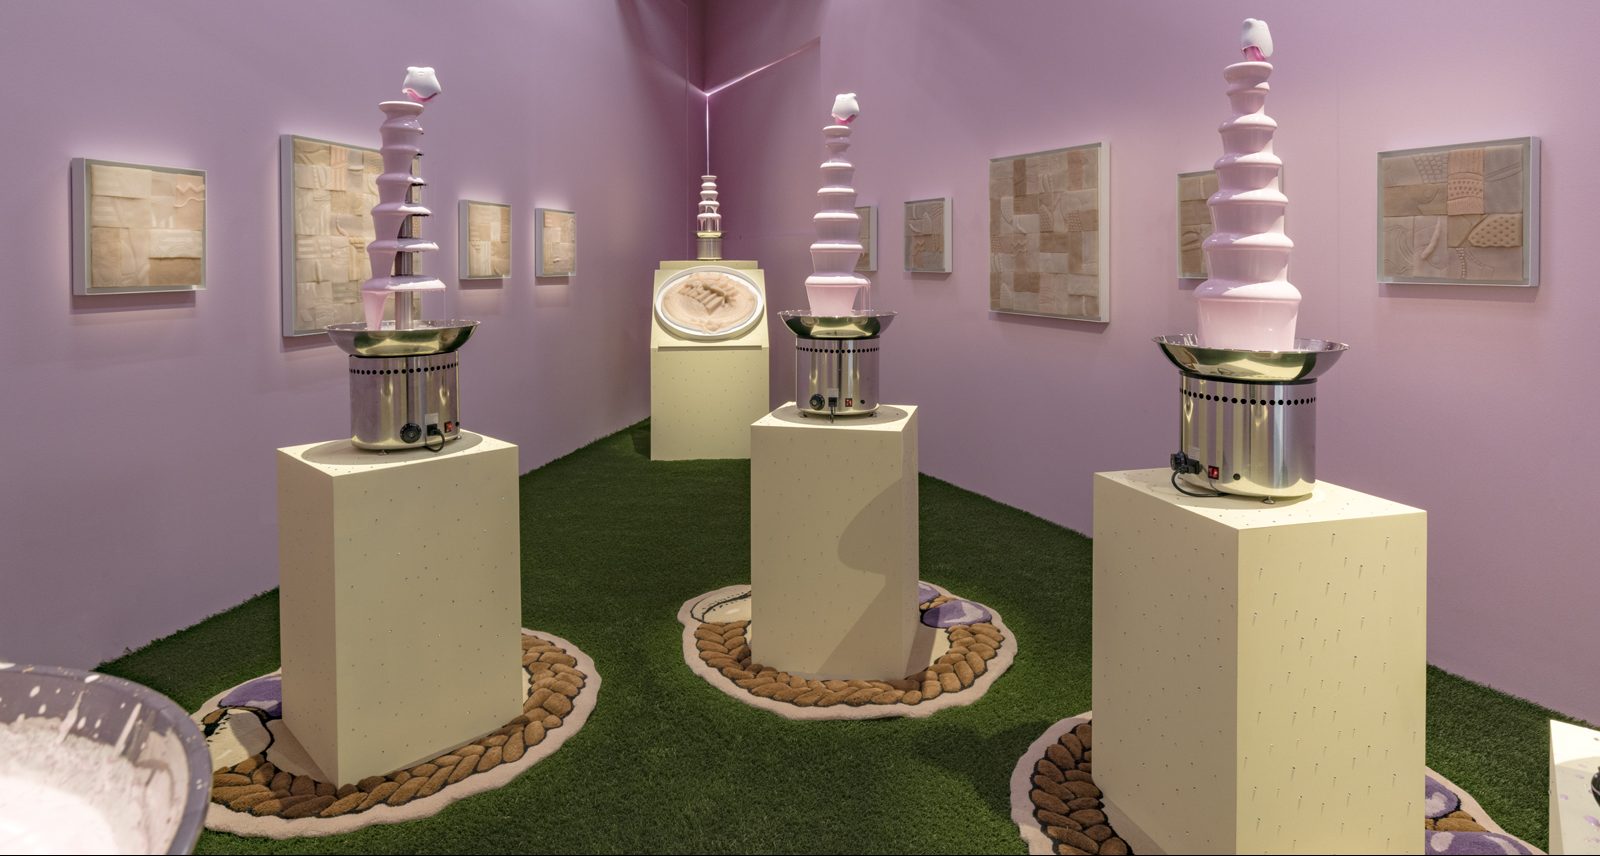 A light pink painted triangular room with green wall to wall astroturf flooring. From this perspective you can see three 6- tiered chocolate fondue fountains, but instead of chocolate they are filled with Lusters Pink Oil Moisturizer Lotion. Topping each of the fountains is a Sqweel 2 oral sex toy, the kind that is white with little pink silicone 